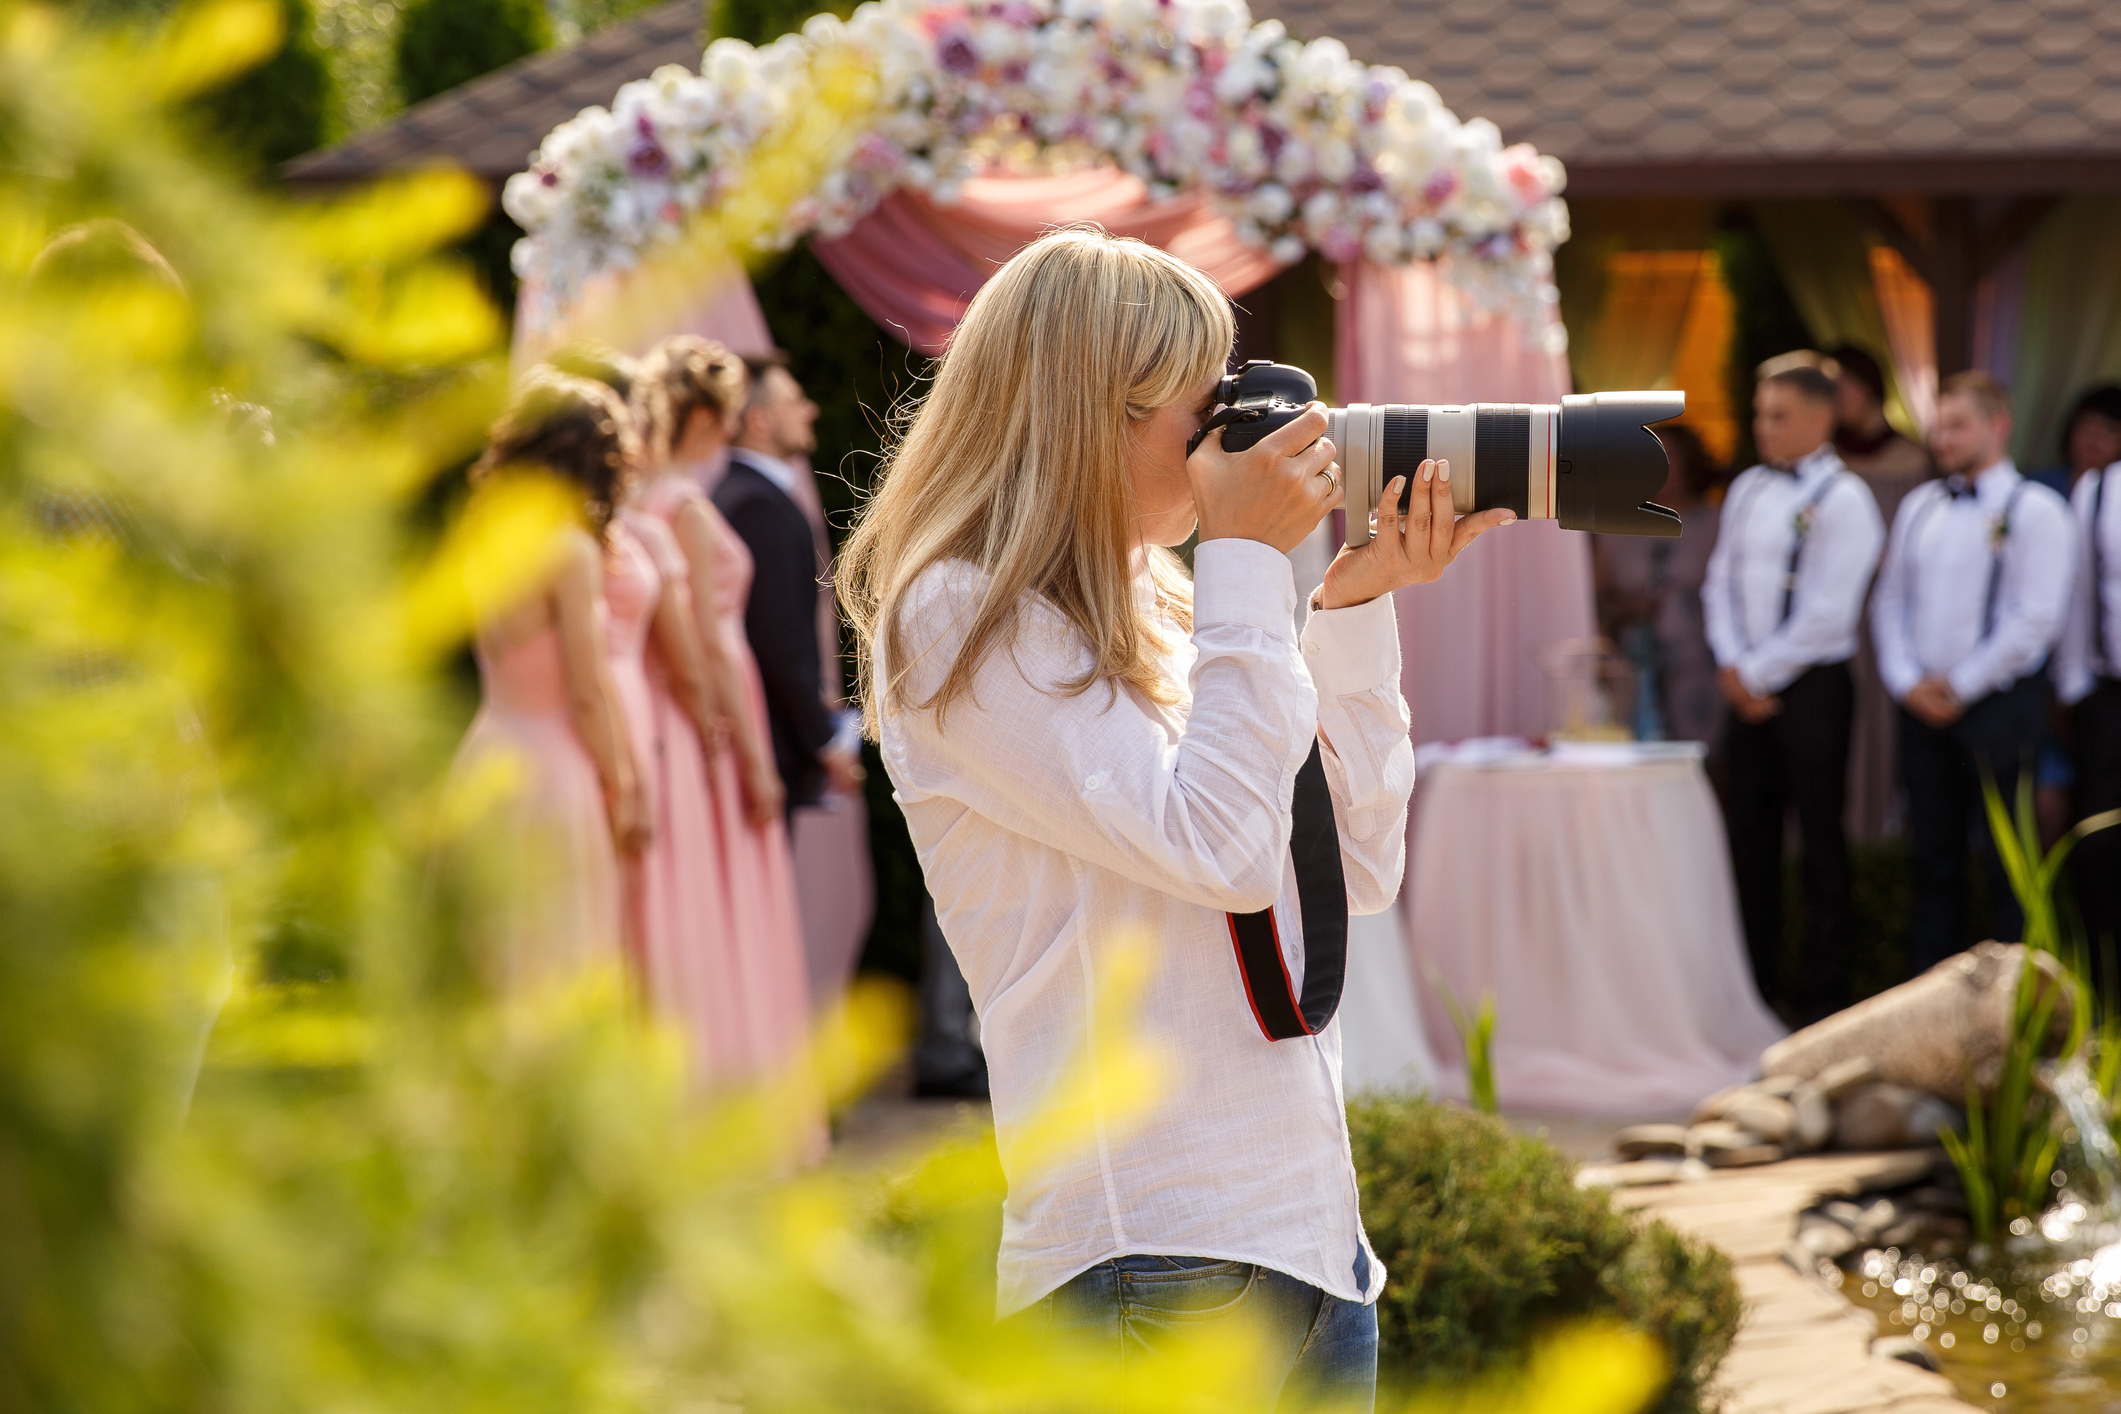 A woman wearing a white shirt holds a camera with a long lens up to her face Out of focus in the background is a wedding party and a flowered canopy